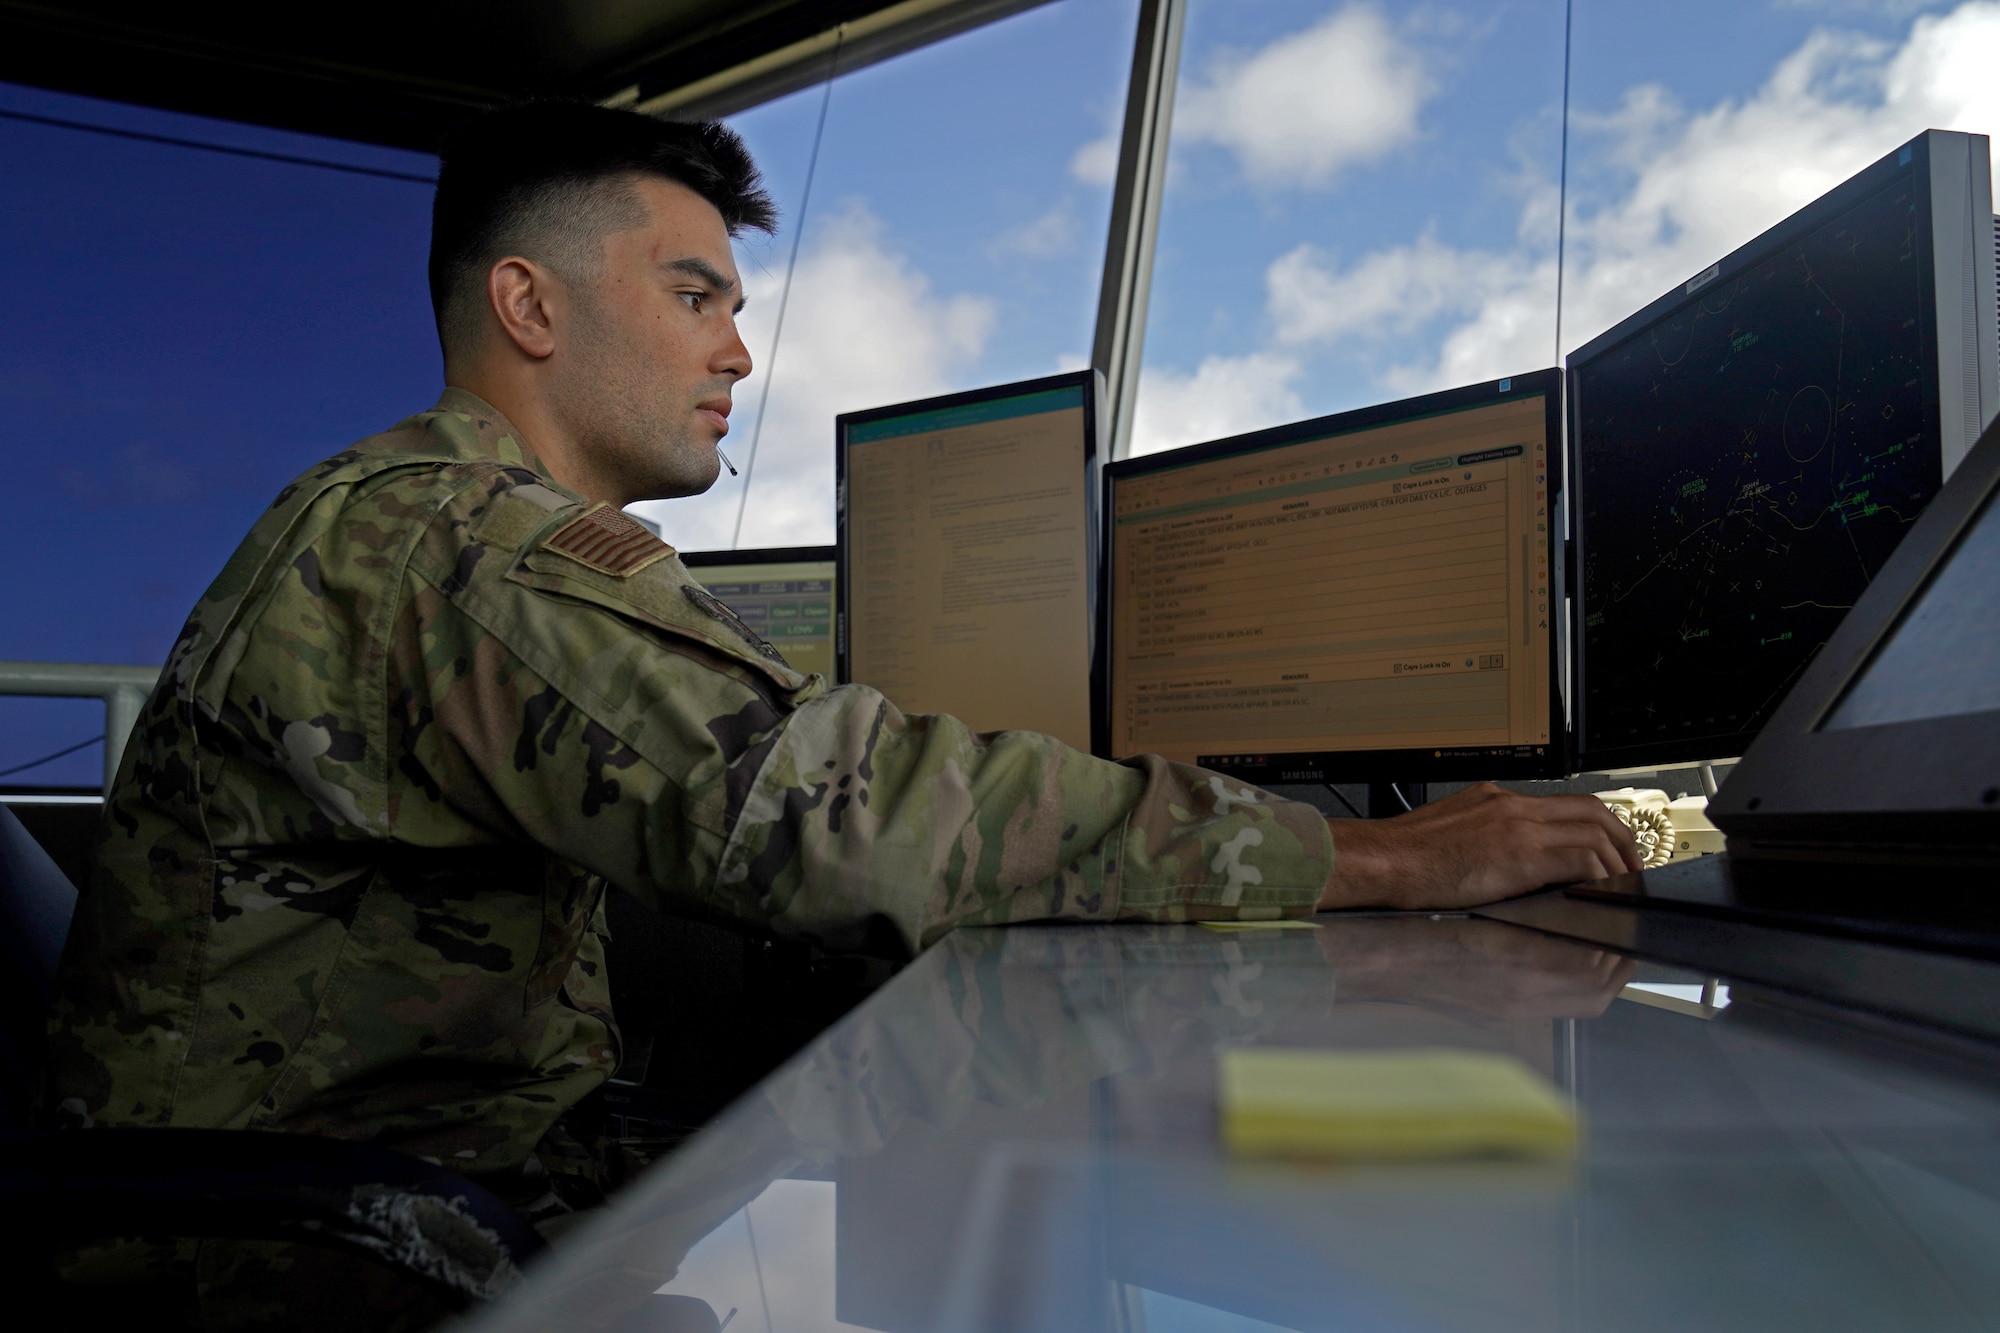 U.S. Air Force Staff Sgt. Brandon Ahuna, 81st Training Wing Operations Support Flight tower watch supervisor, works on his computer inside the Keesler Air Traffic Control tower at Keesler Air Force Base, Mississippi, June 25, 2021. The 81st TRW OSF traffics the aircraft on the Keesler flightline and the local airspace. (U.S. Air Force photo by Senior Airman Seth Haddix)